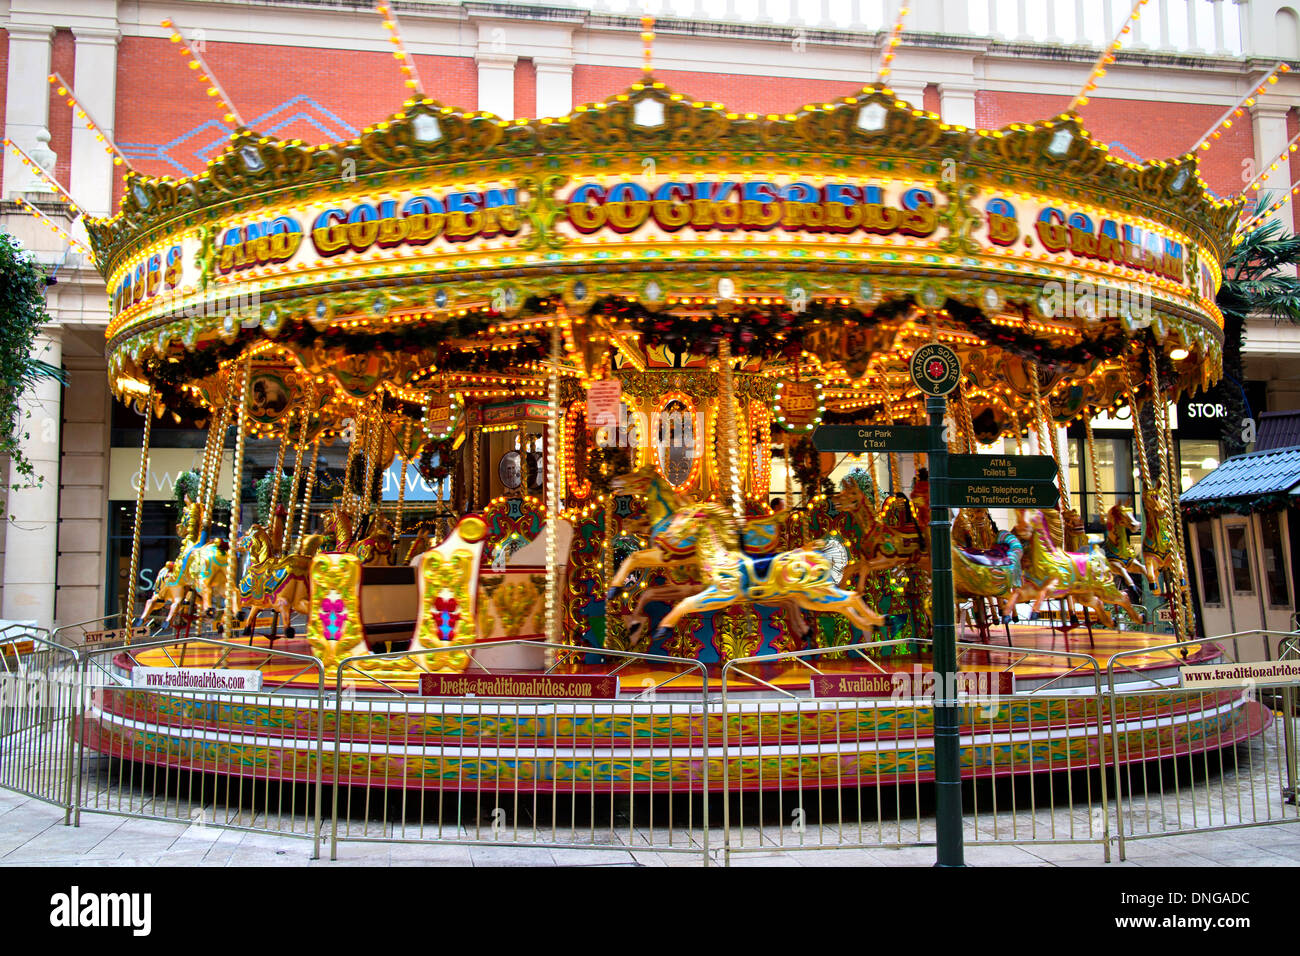 A carousel or merry-go-round amusement ride at Trafford Centre Stock Photo